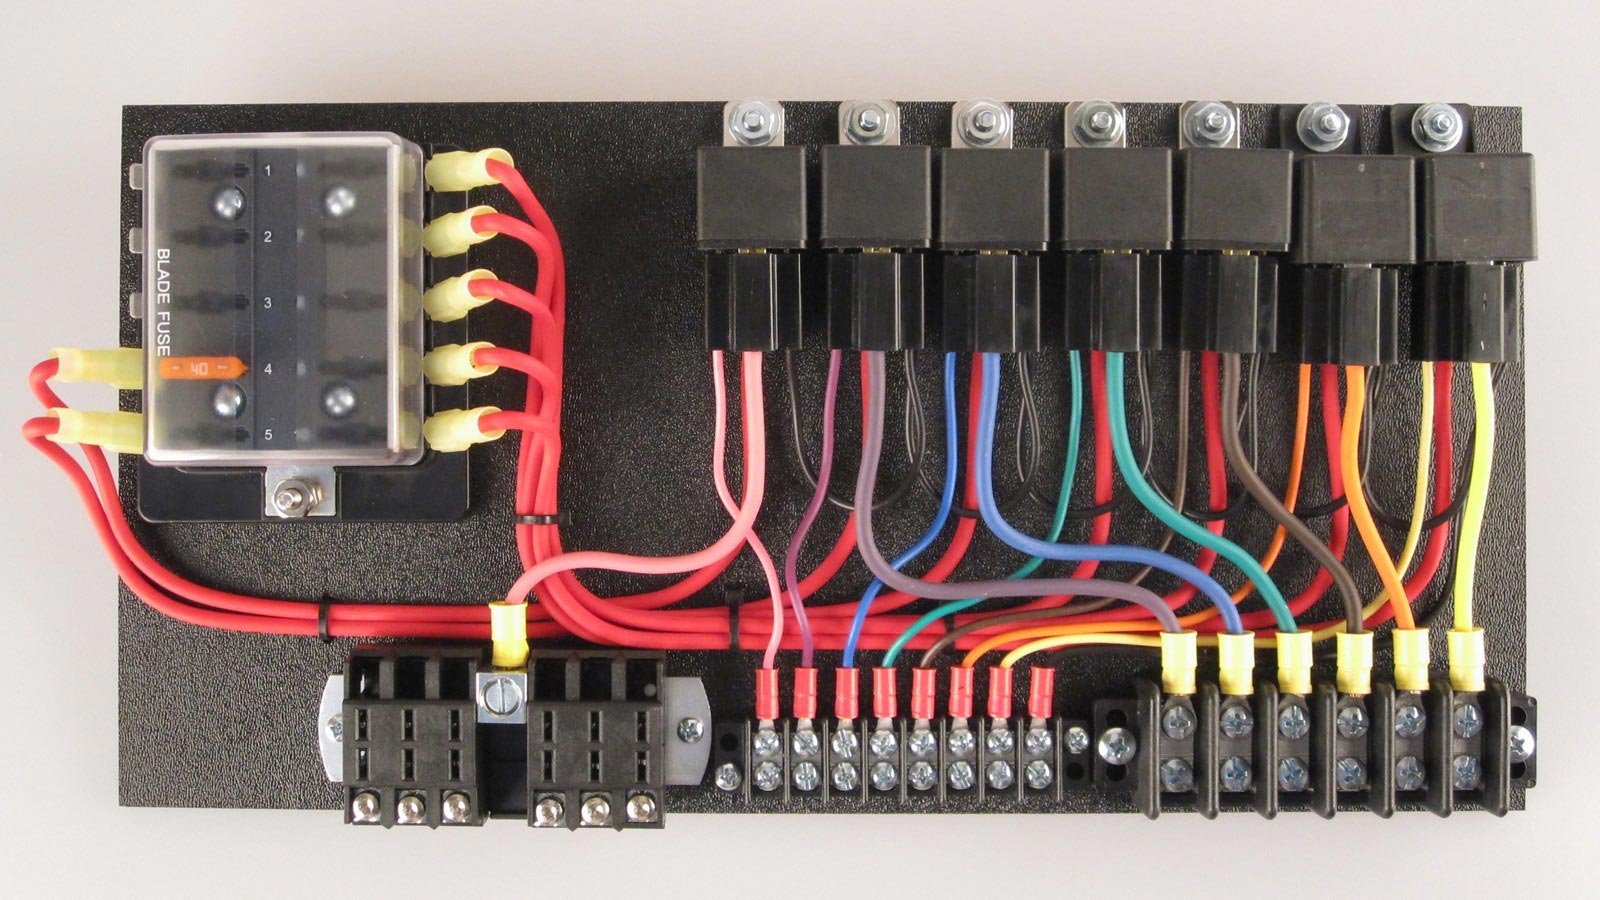 7-Relay Panel with Switched Panel with Relays in Sockets